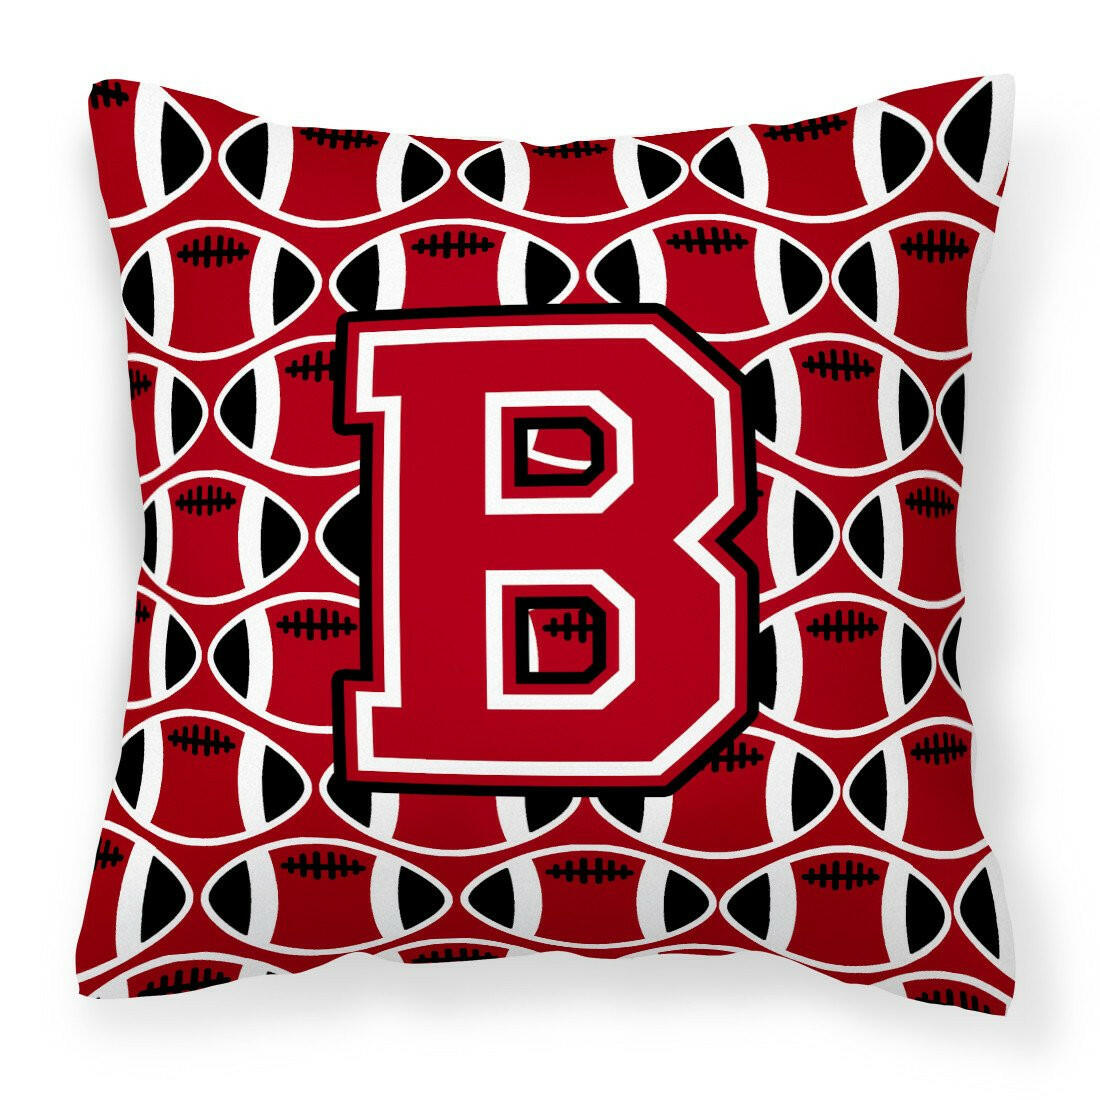 Letter B Football Red, Black and White Fabric Decorative Pillow CJ1073-BPW1414 by Caroline's Treasures